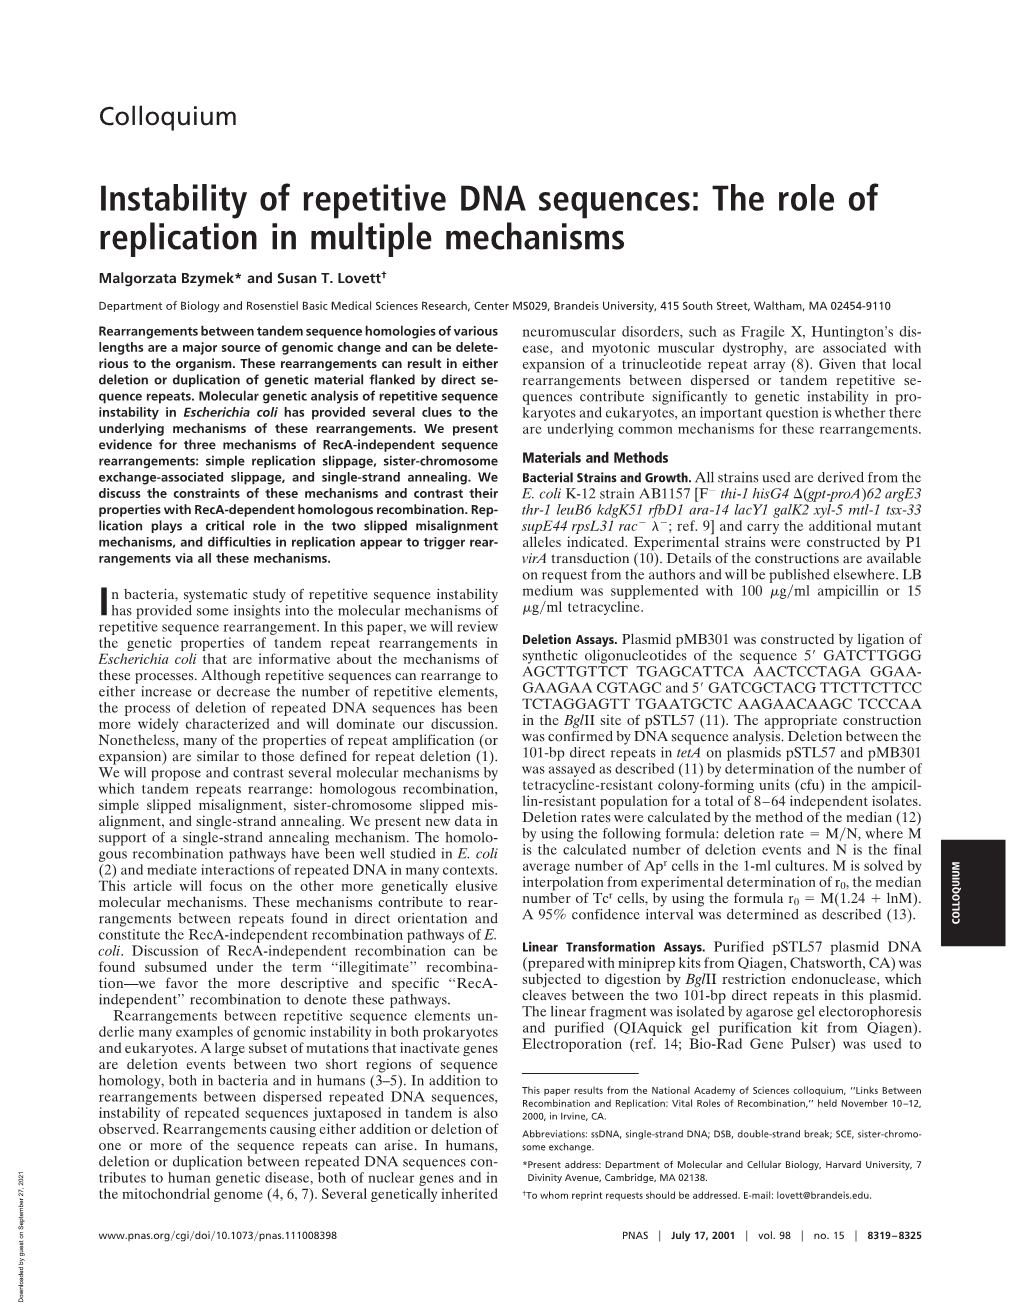 Instability of Repetitive DNA Sequences: the Role of Replication in Multiple Mechanisms